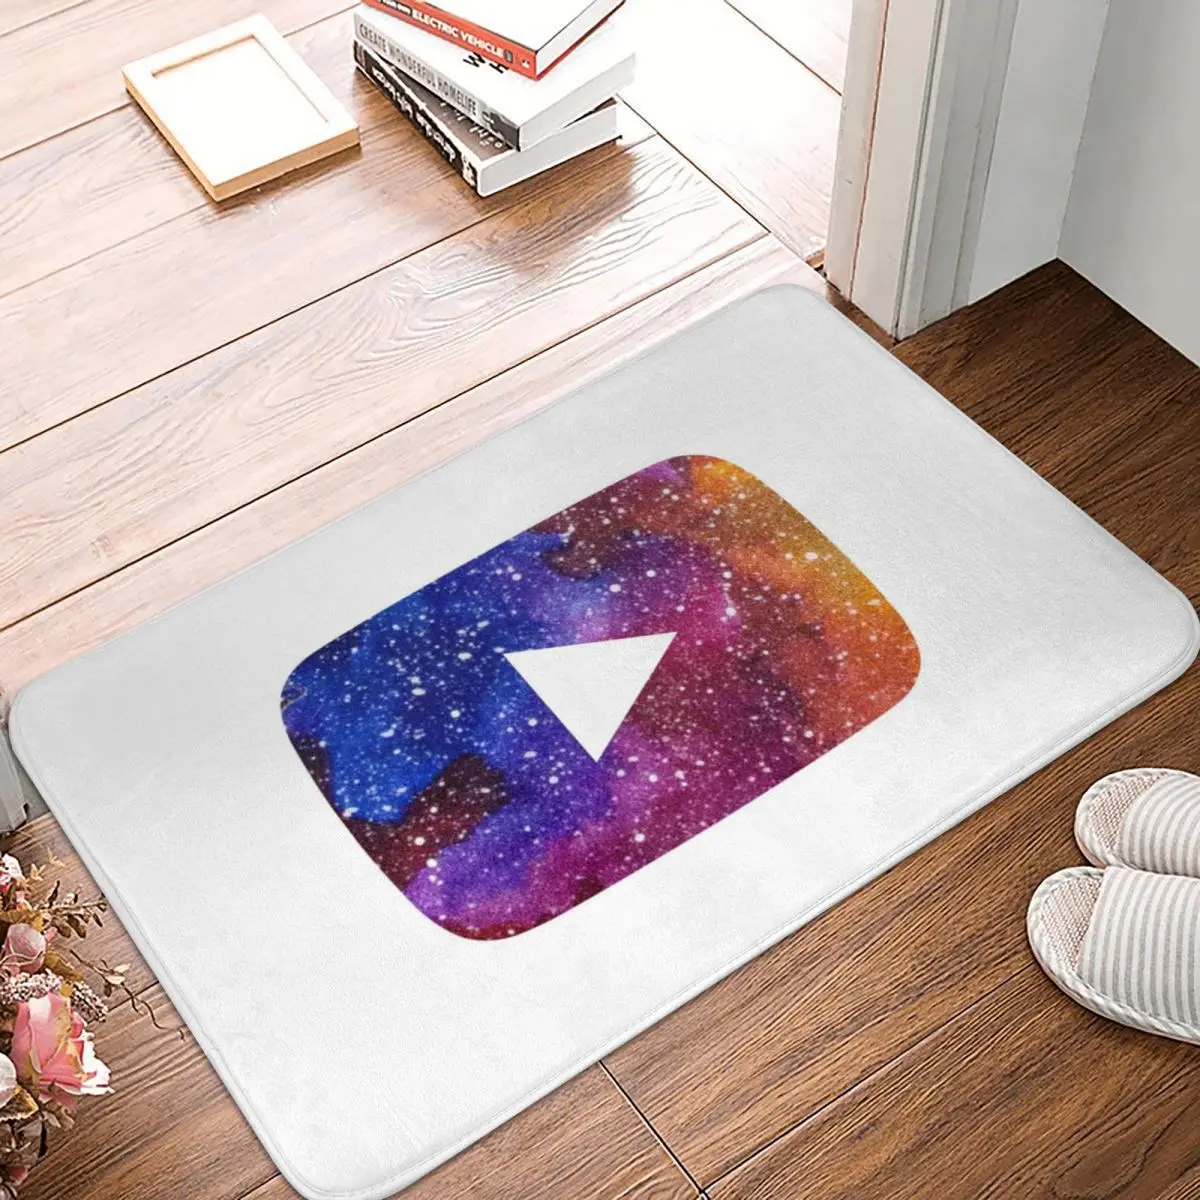 

YouTube Play Button Space Doormat Rug Carpet Mat Footpad Polyester Non-slip Dust-Proo Entrance Kitchen Bedroom Balcony Toilet